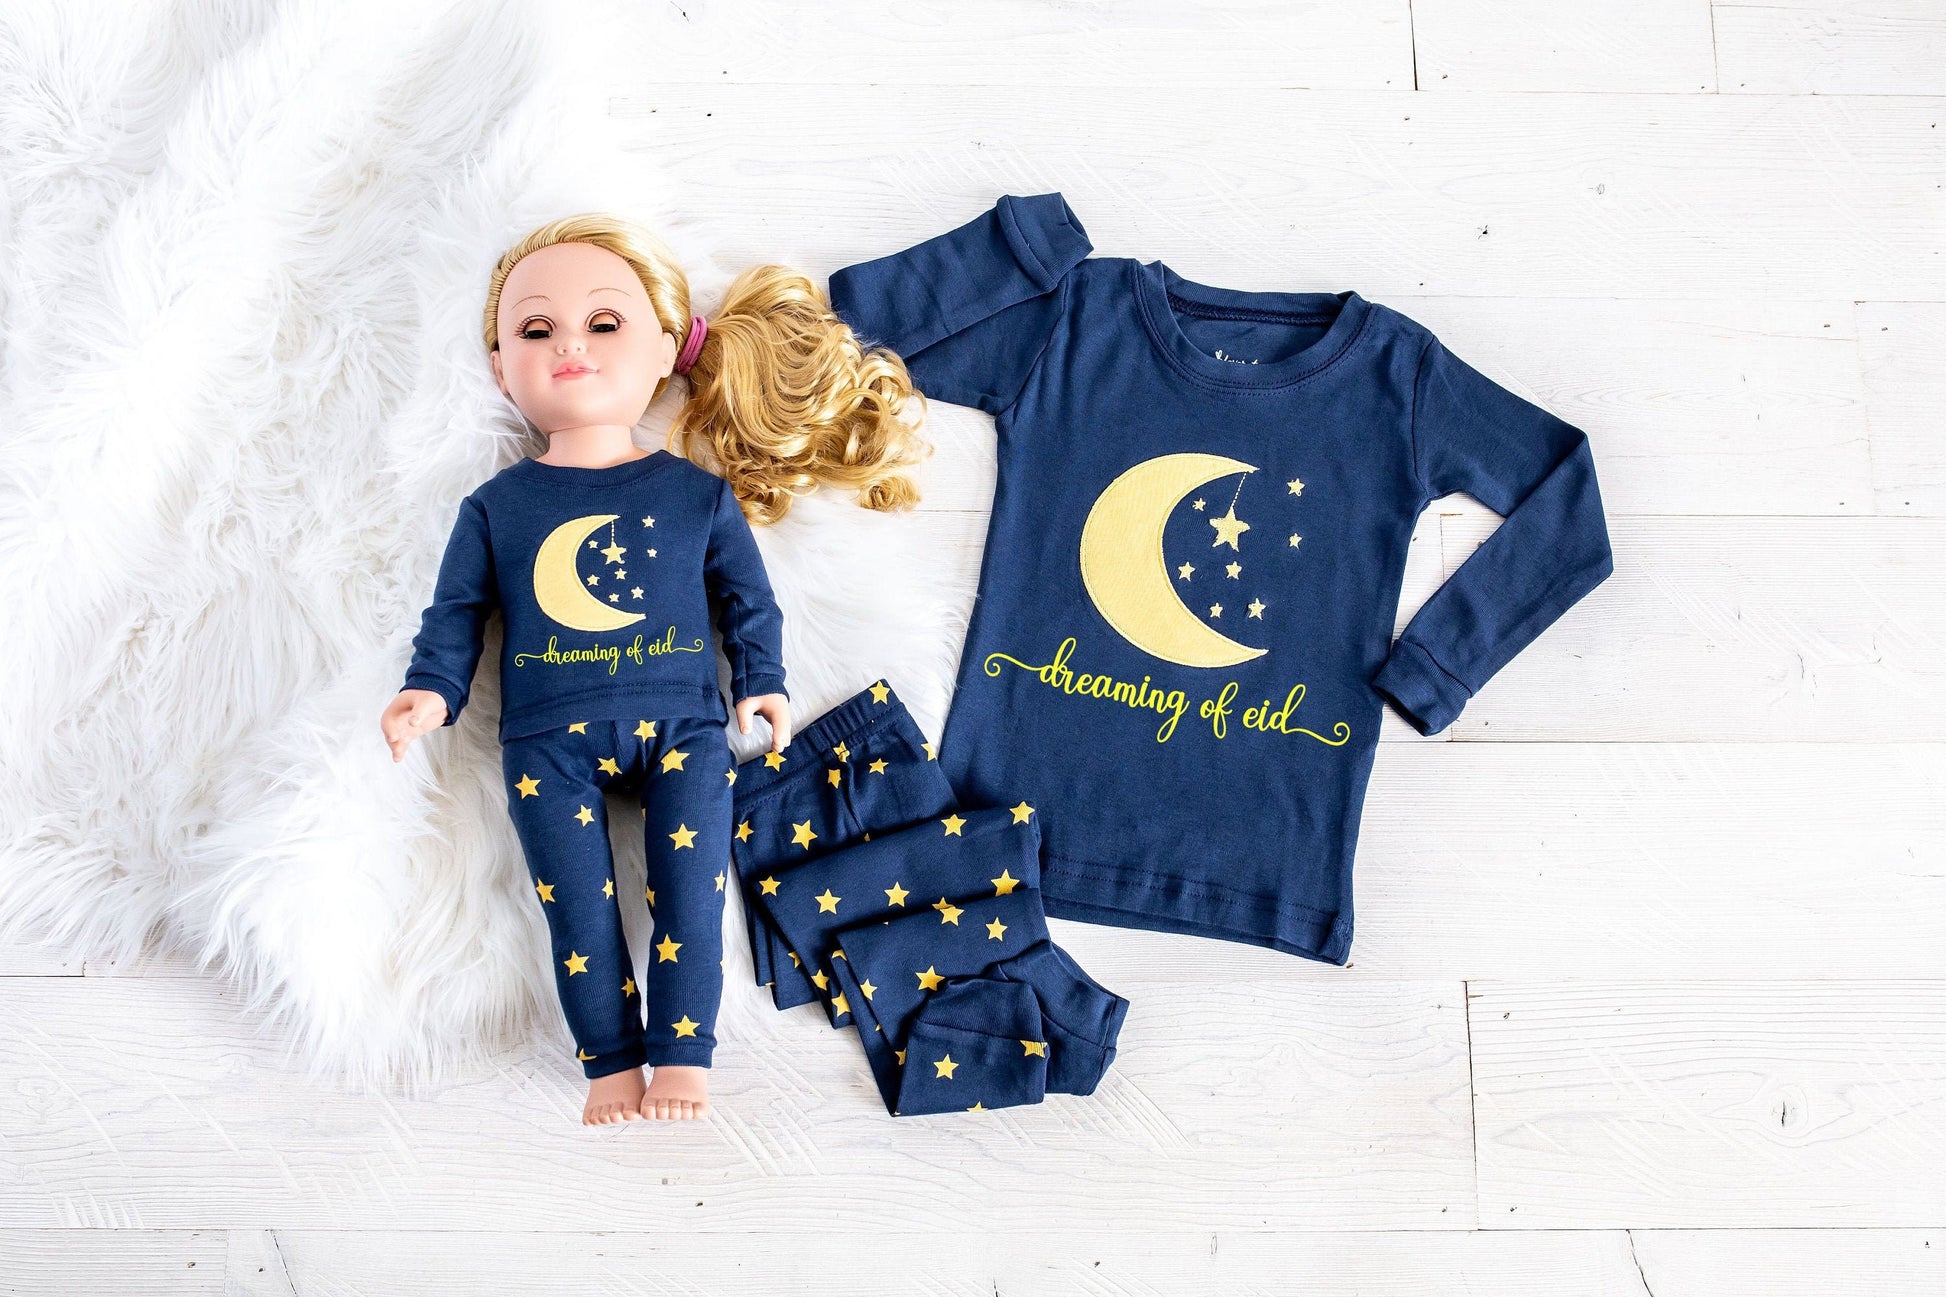 Dreaming of Eid Child and Doll Matching Pajamas -  Kids Eid Pajamas - Eid Mubarak - Eid Gifts - Eid Gifts for Kids - Eid Pajamas for Kids